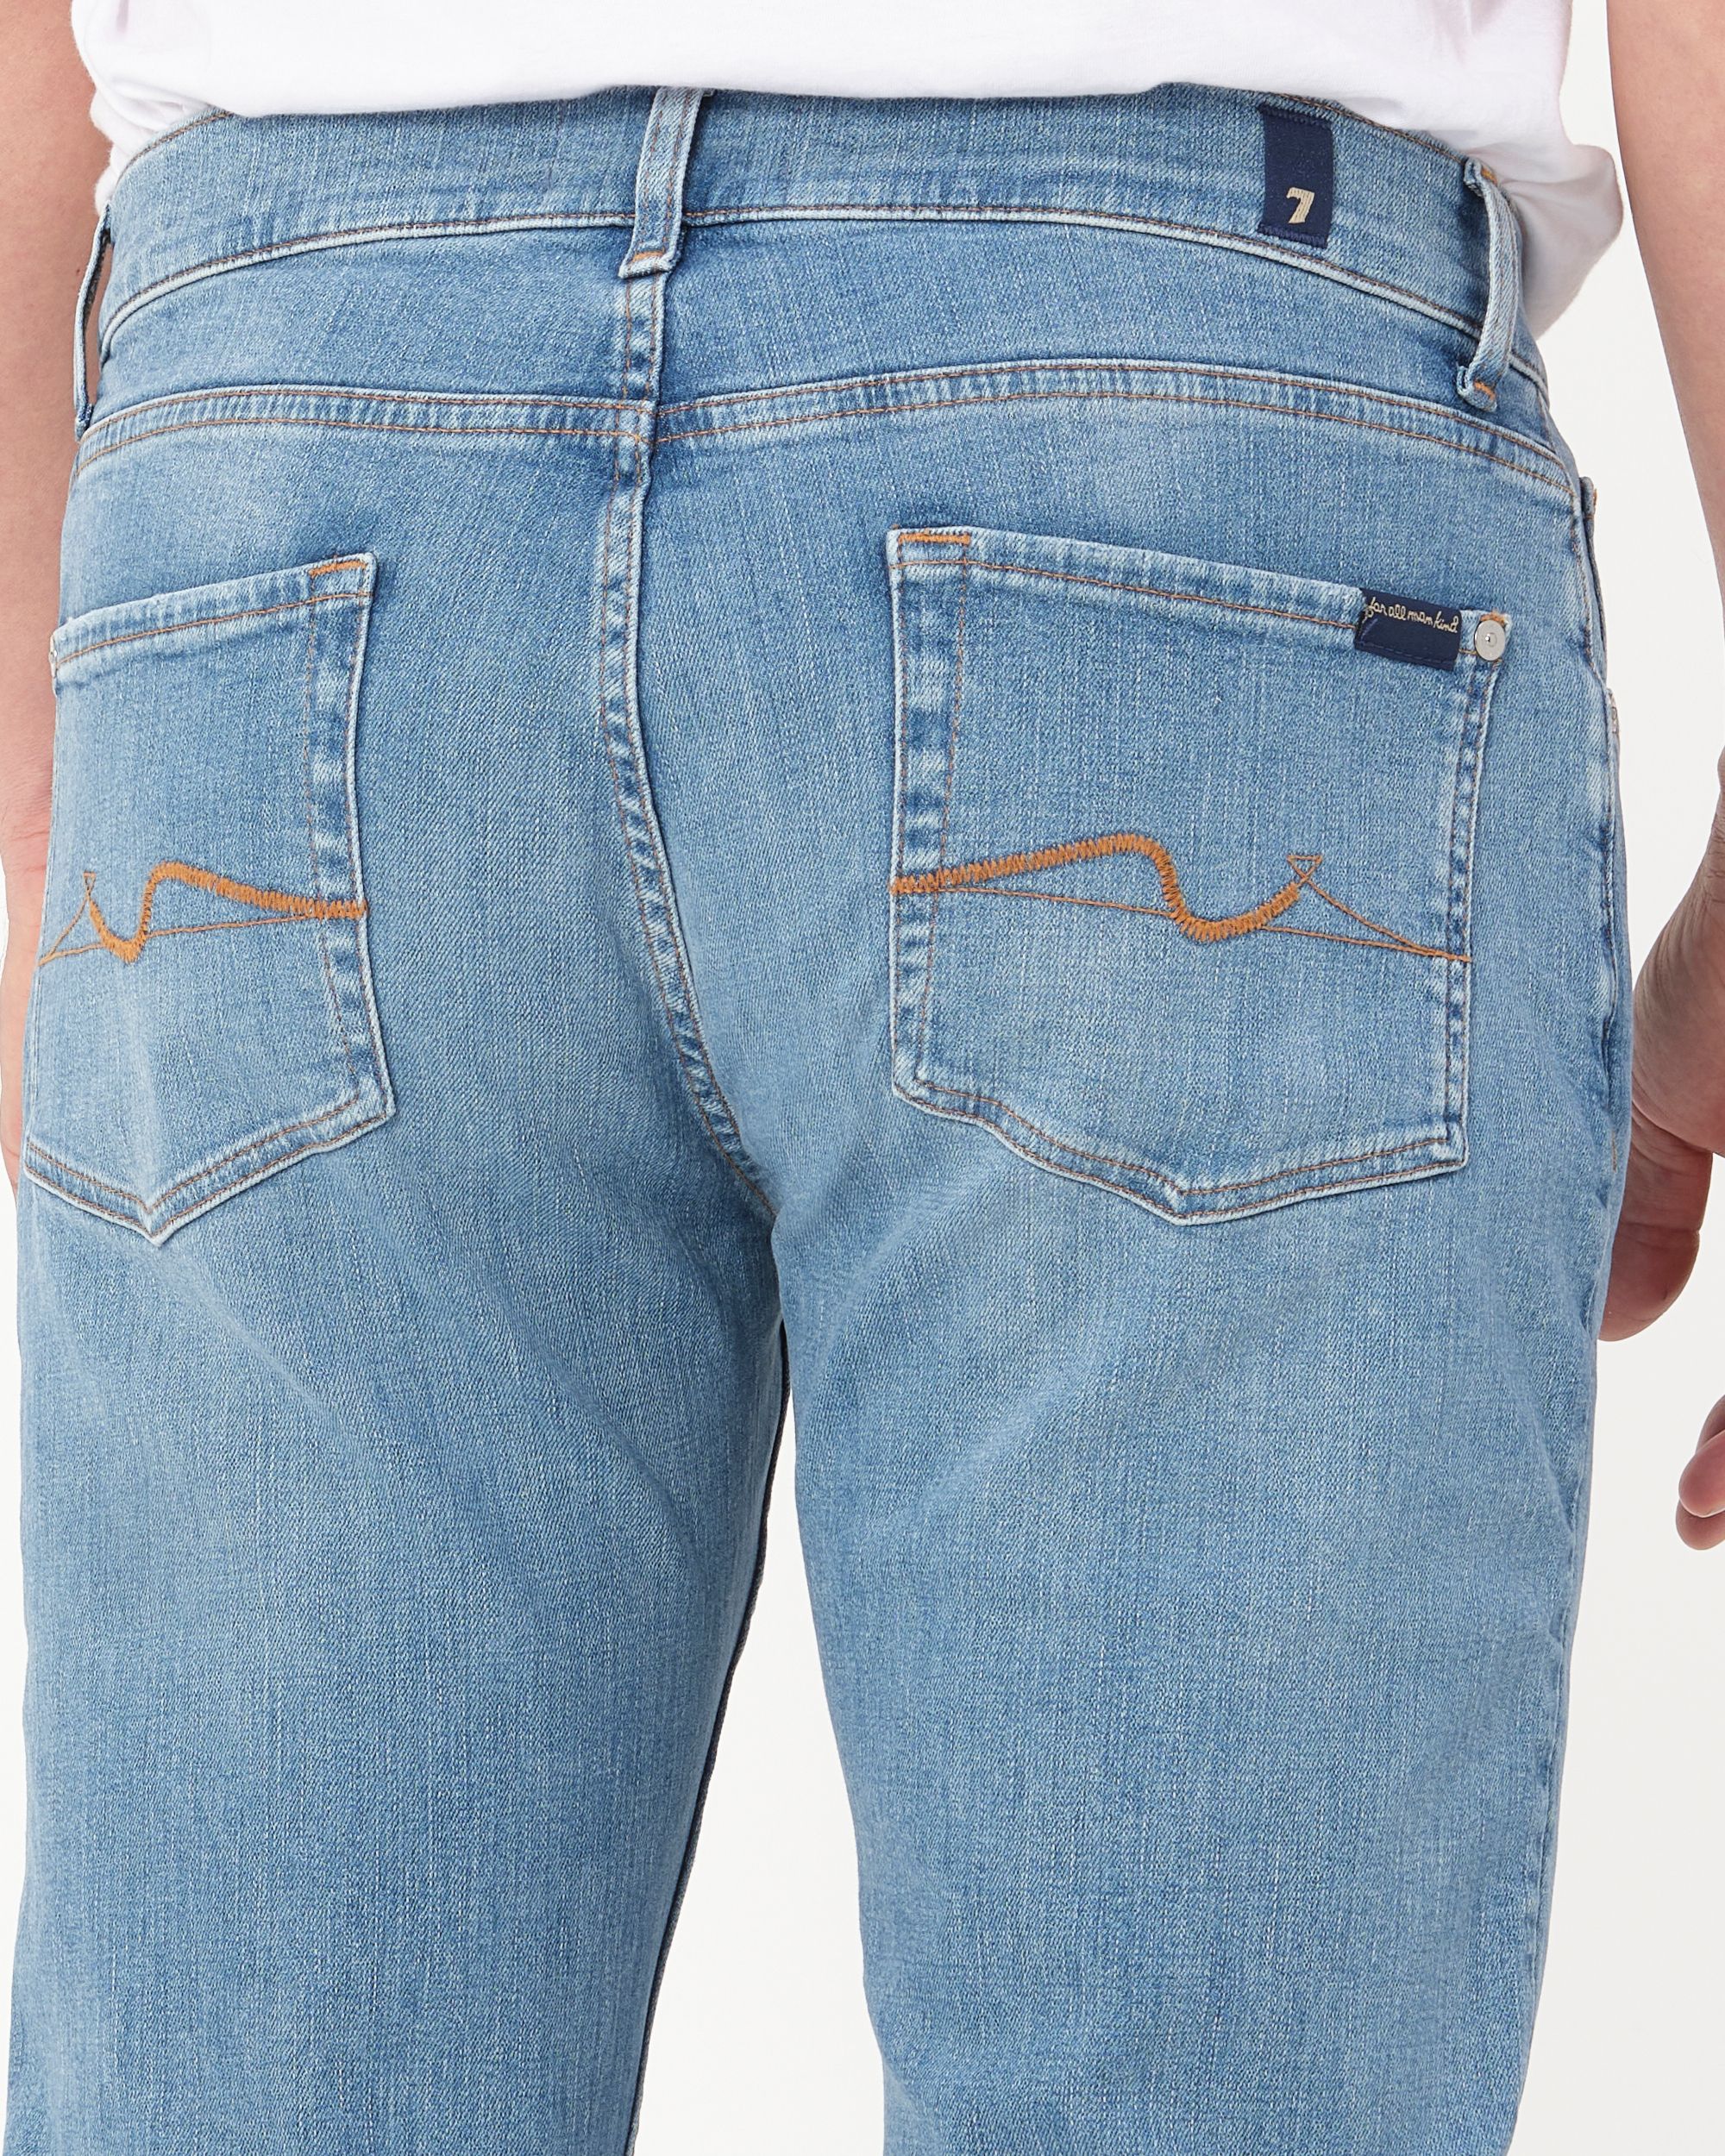 Seven for all mankind Jeans Blauw 091552-001-30